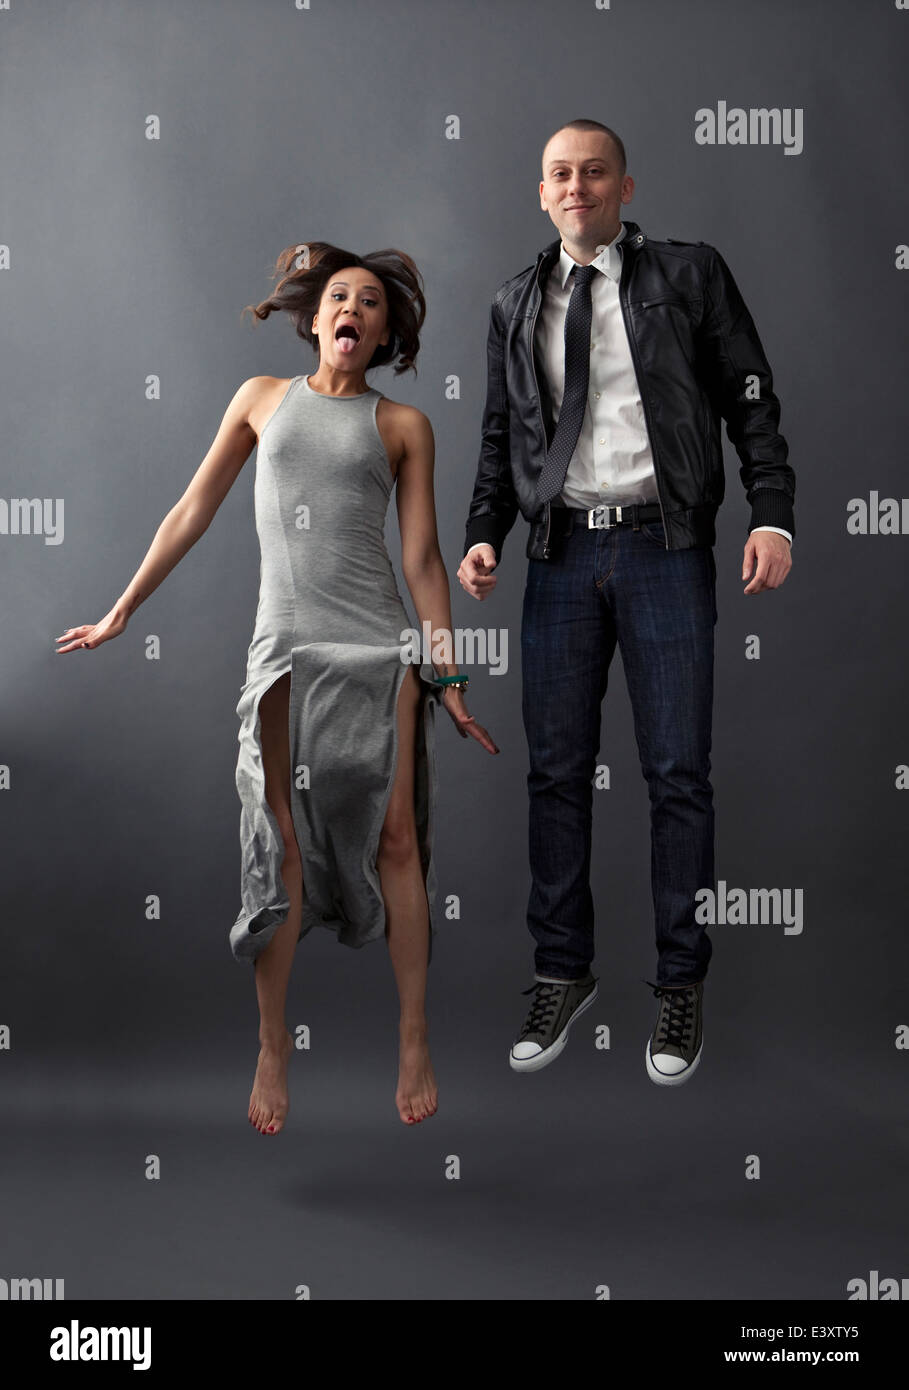 Couple jumping together in studio Stock Photo